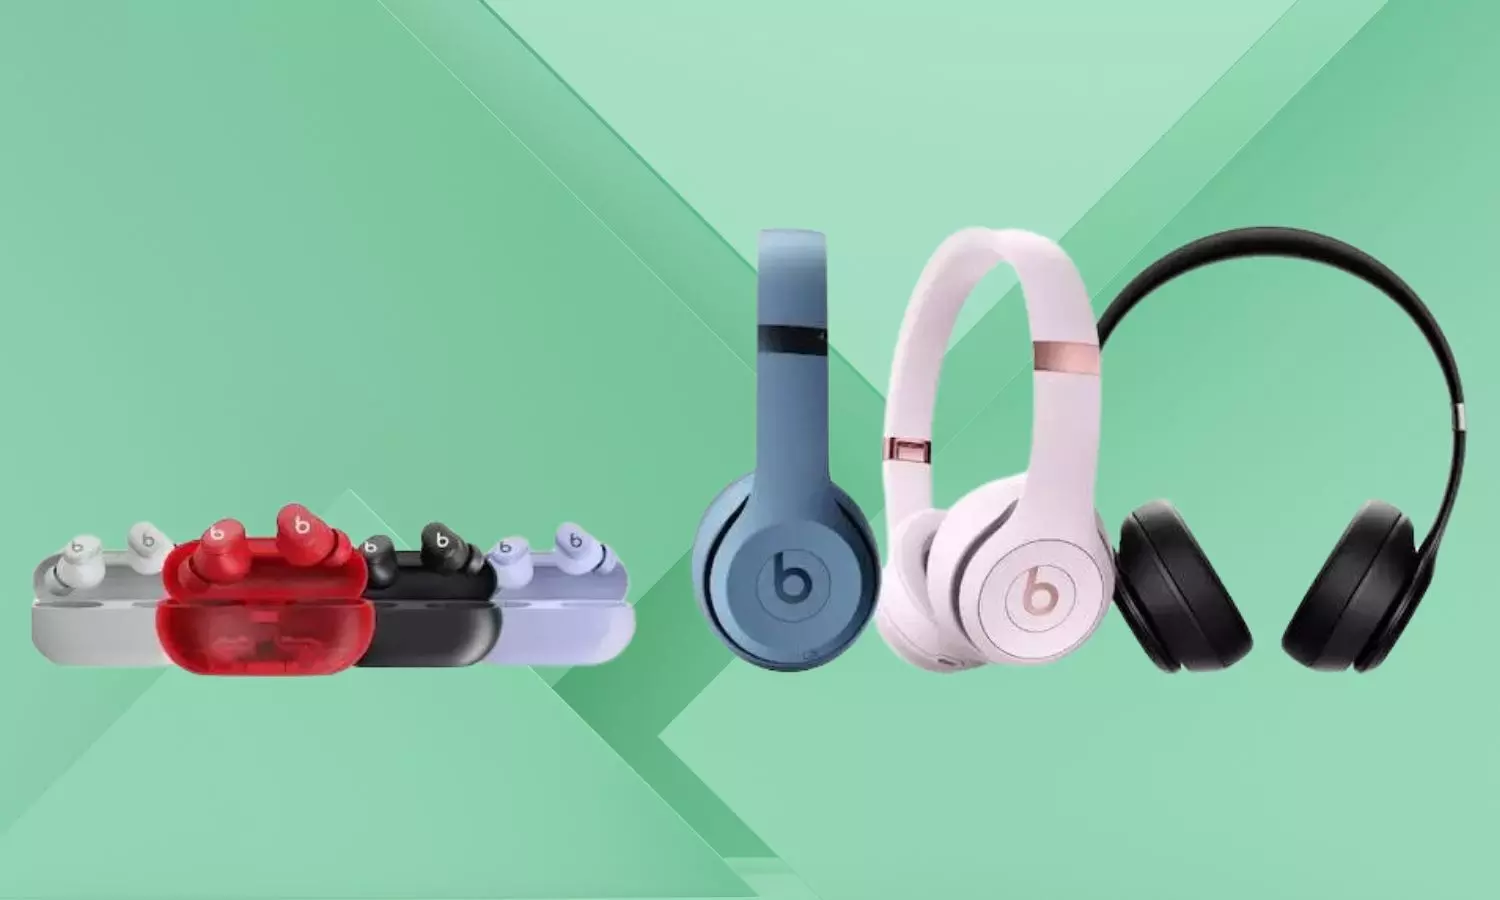 Apples Beats Solo Buds and Beats Solo 4 Wireless Headphones; PC: Apple